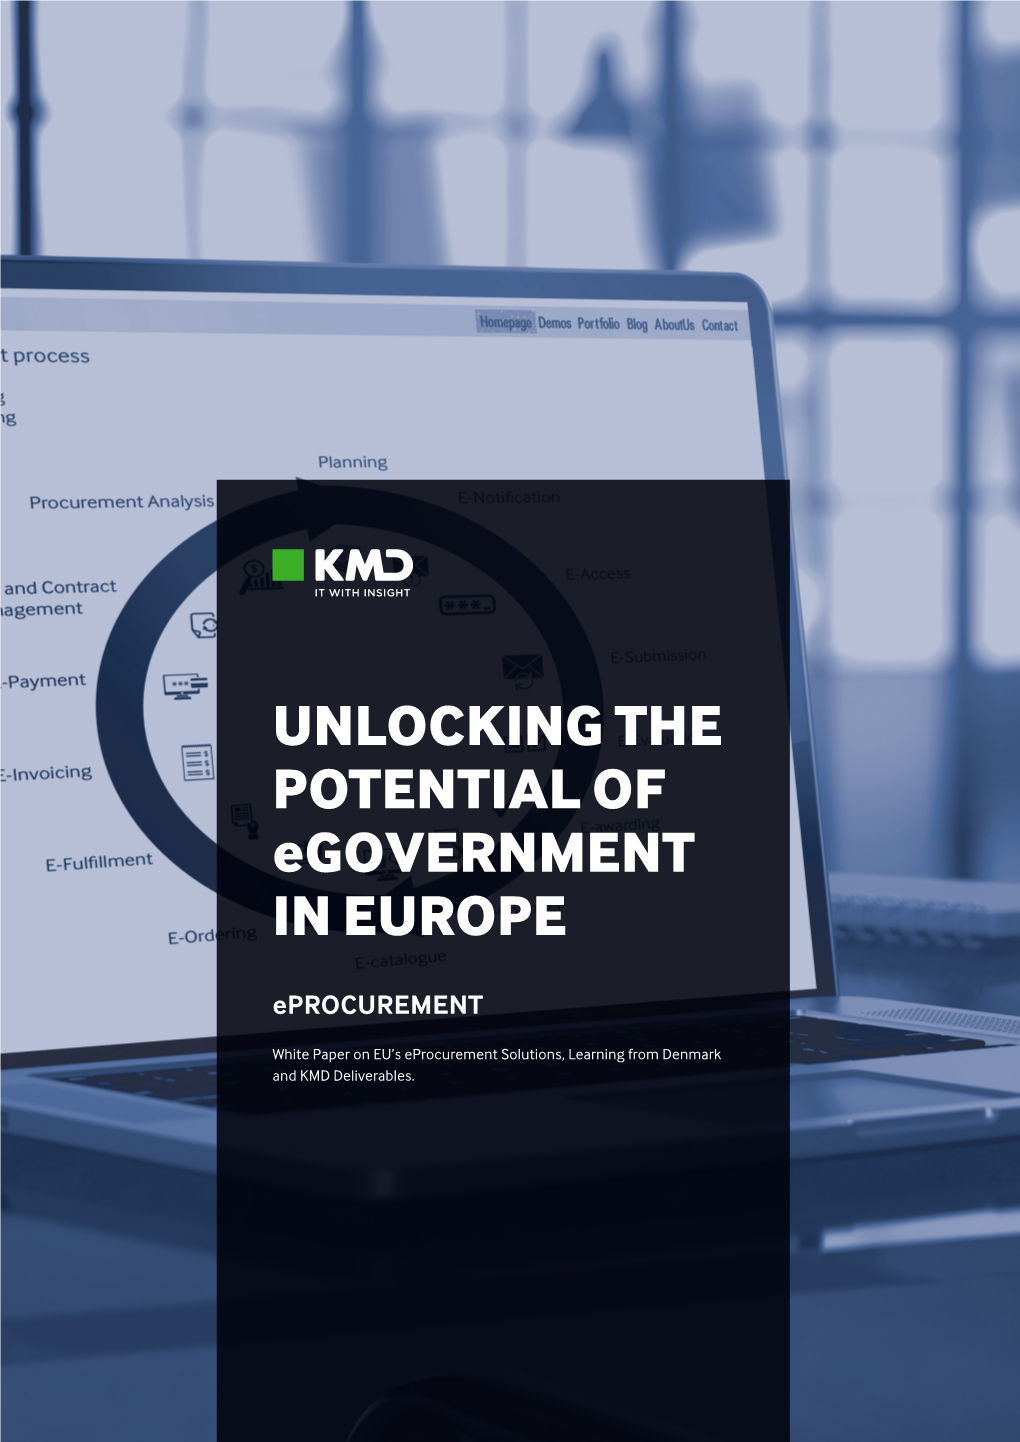 UNLOCKING the POTENTIAL of Egovernment in EUROPE Eprocurement